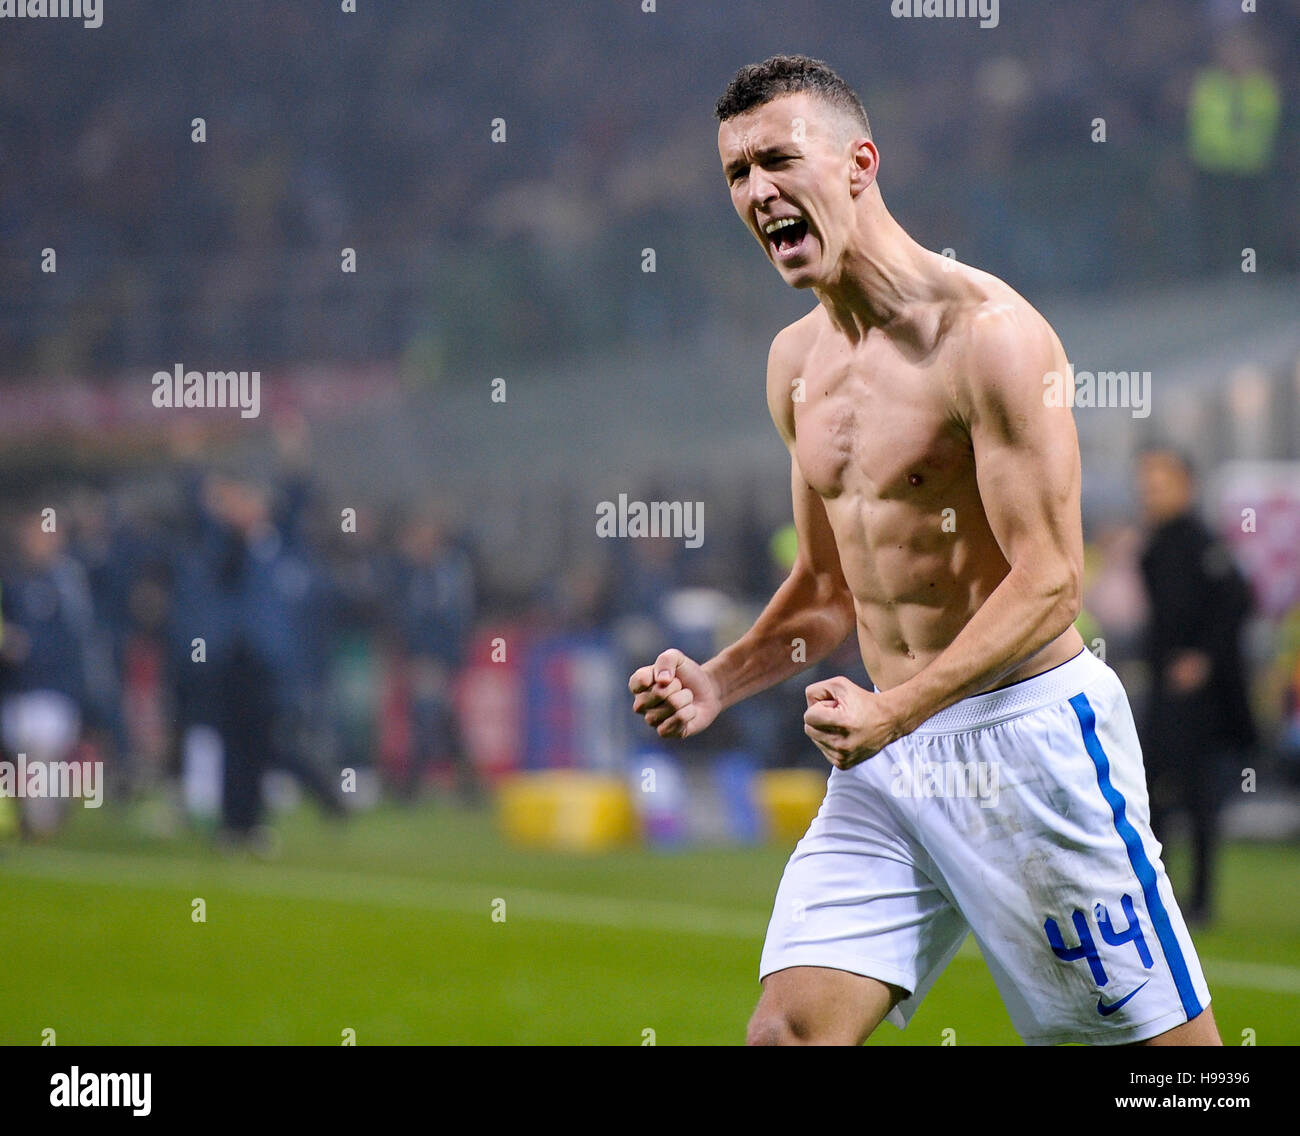 Milan, Italy. 20 november: Ivan Perisic of FC Internazionale celebrates after scoring a goal during the Serie A football match between AC Milan and FC Internazionale. Stock Photo